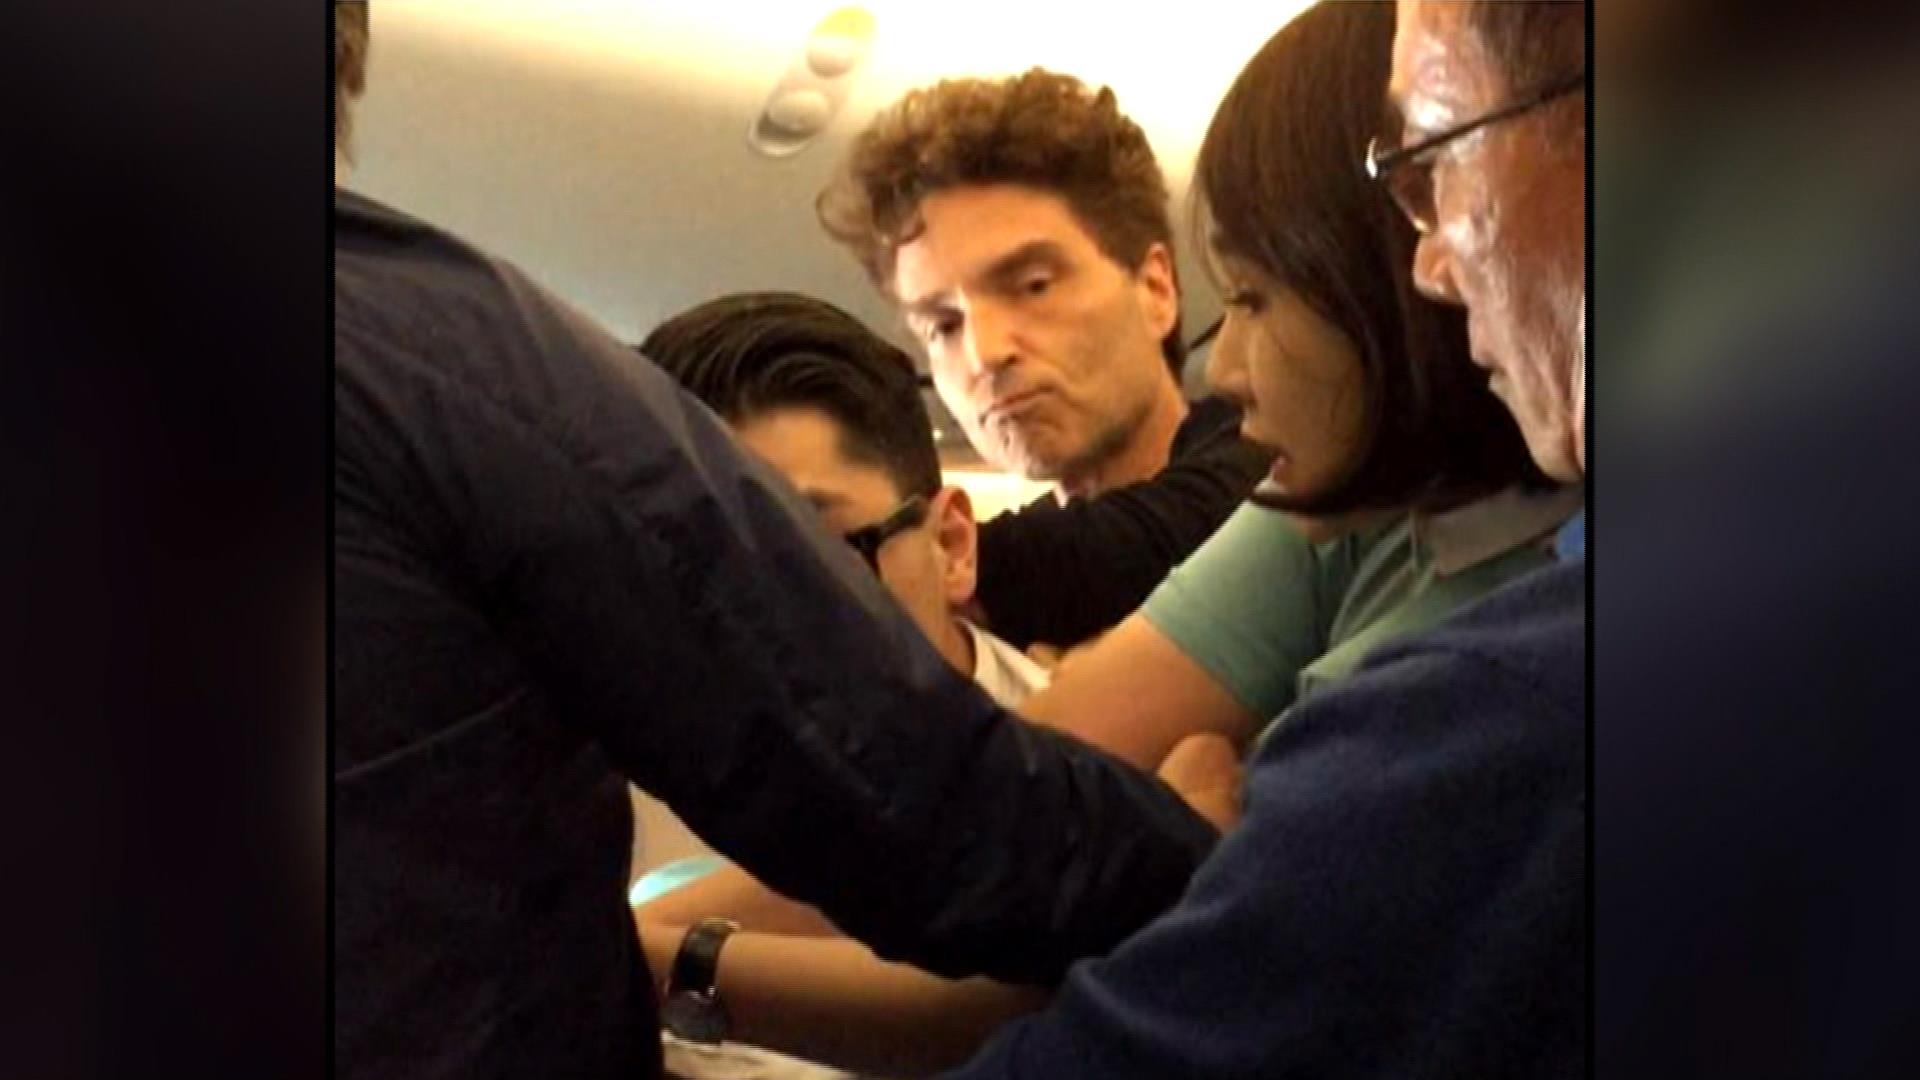 Singer Richard Marx helps restrain man on plane, wife Daisy Fuentes captures moment